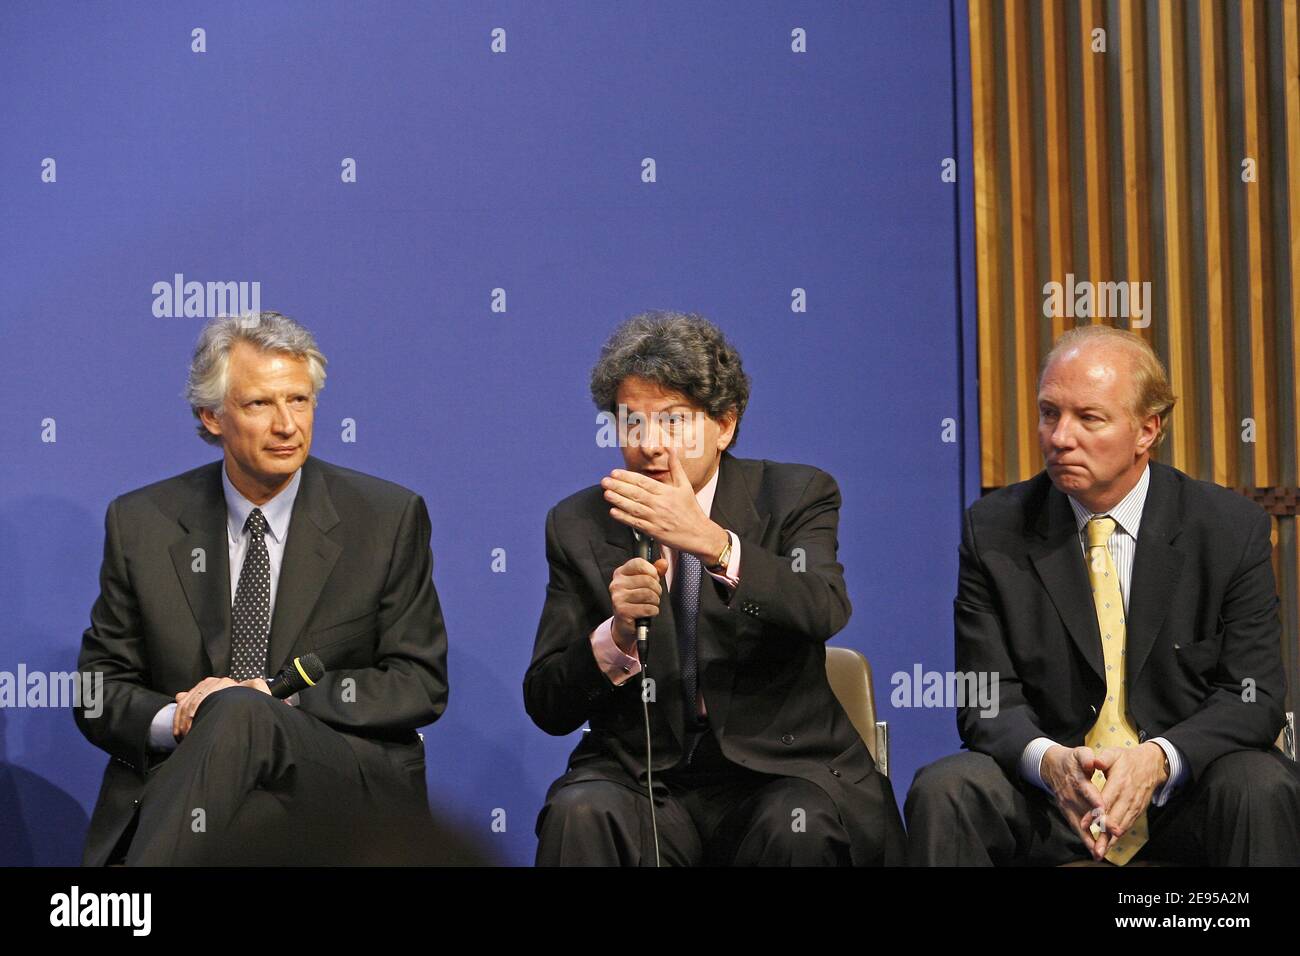 Prime Minister Dominique de Villepin with Thierry Breton, Minister for the Economy, Finance and Industry, Brice Hortefeux, Minister delegate for Local Government present plans to reduce the country's massive debt during a meeting on public finances in Paris, France, on January 12, 2006. Photo by Mehdi Taamallah/ABACAPRESS.COM Stock Photo